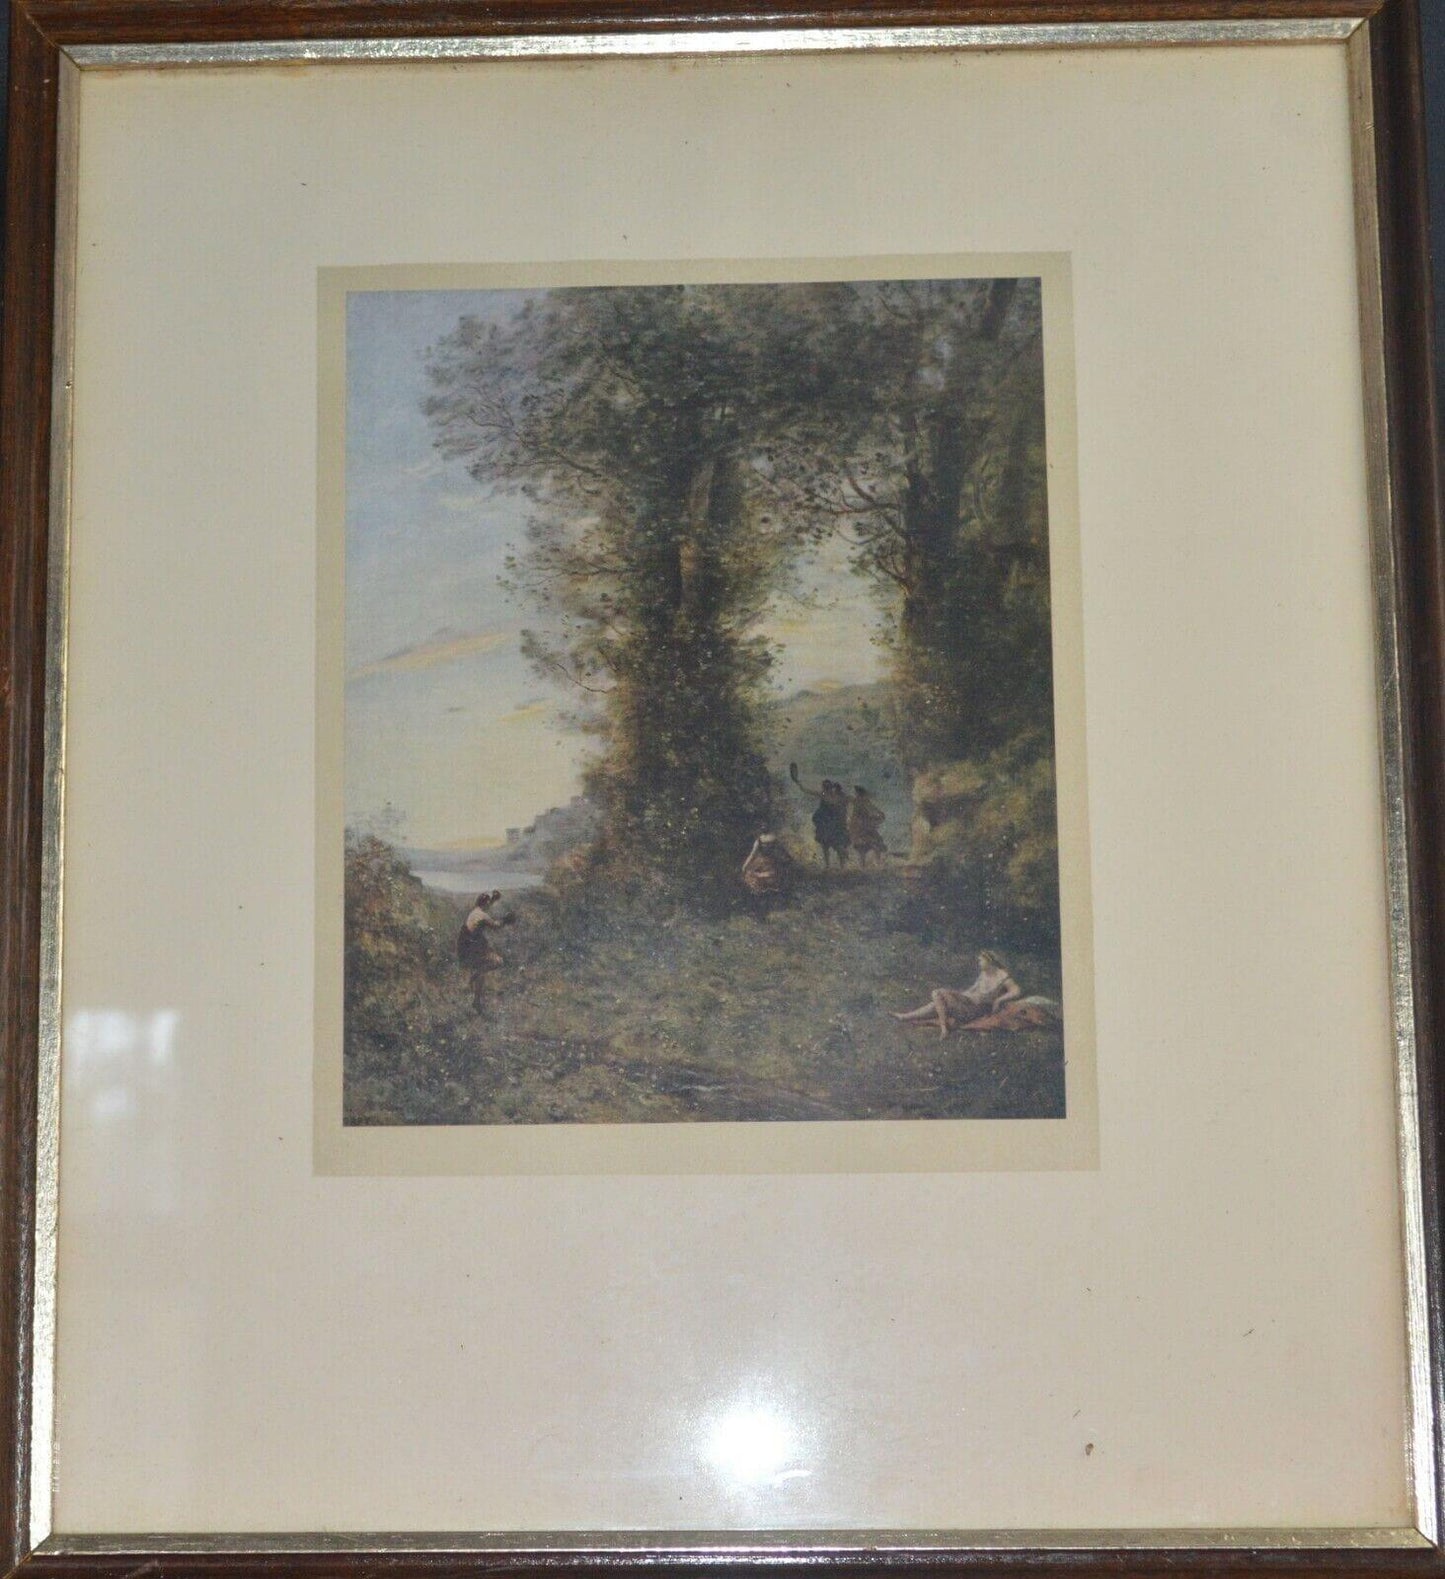 FRAMED COROT PRINT DEPICTS LADIES GATHERED IN THE WOODS - TMD167207